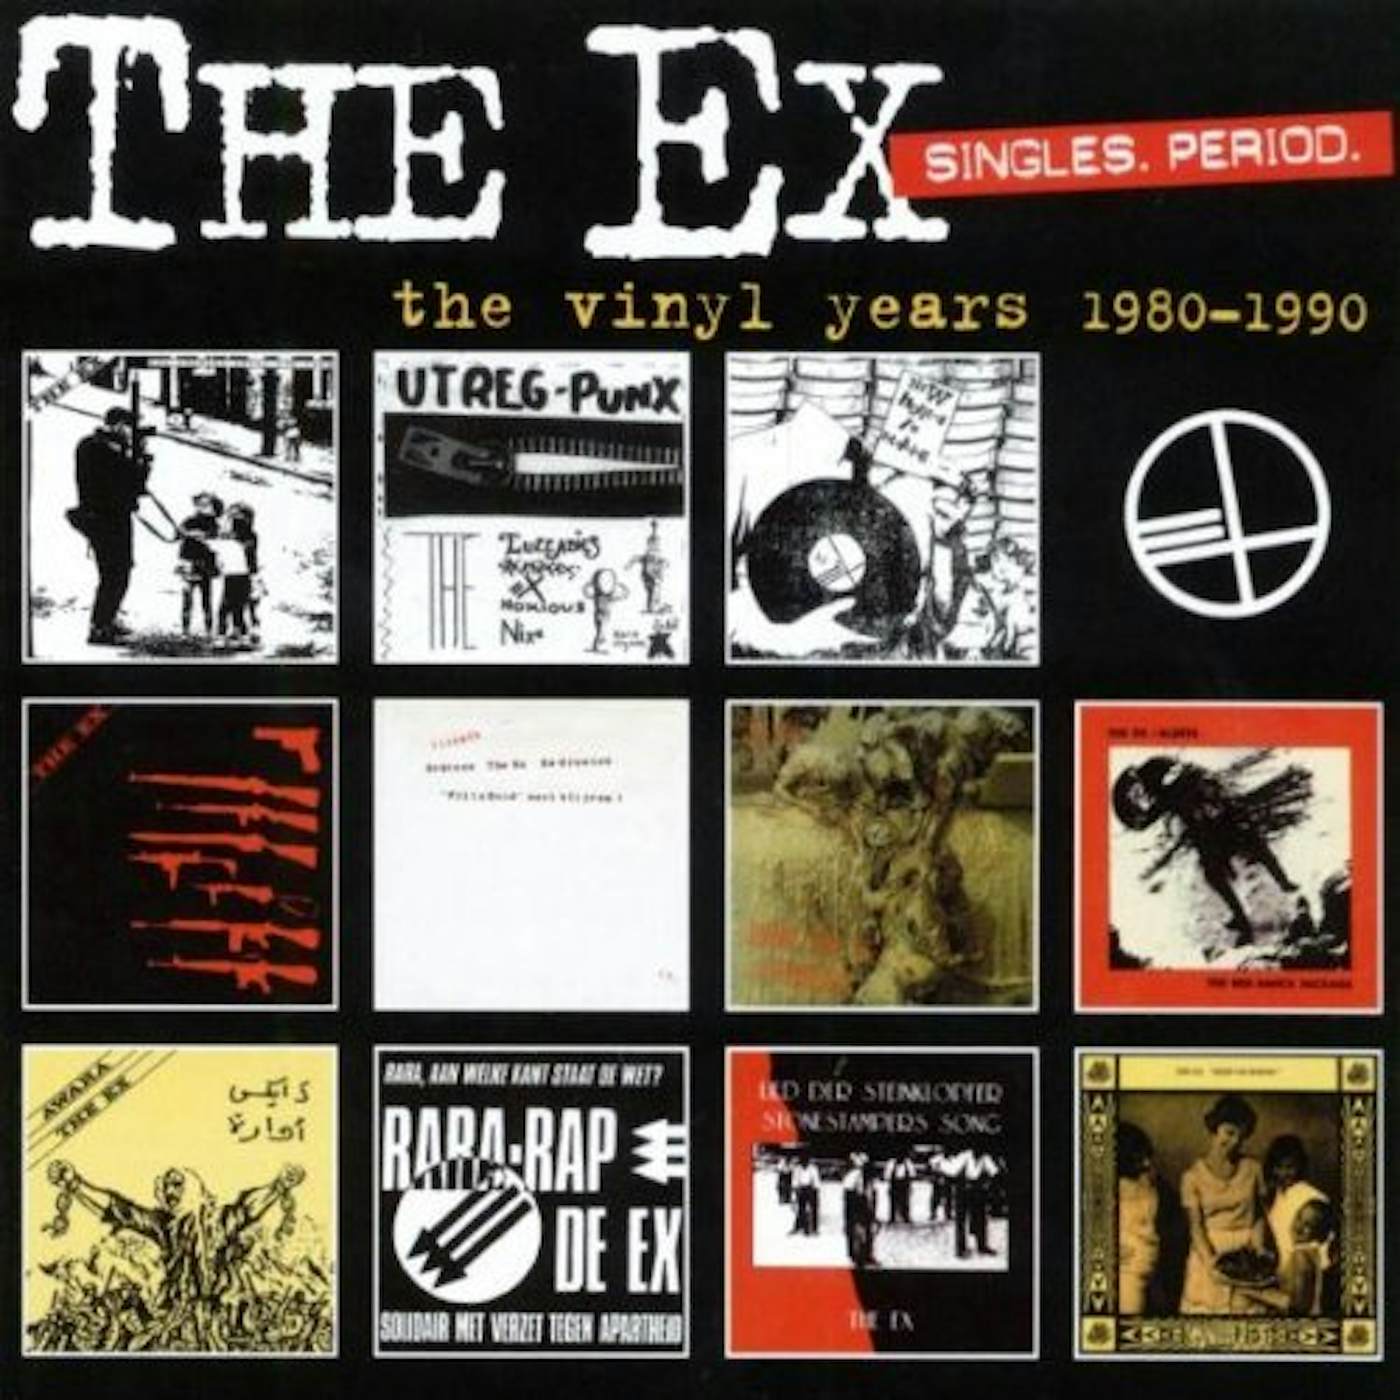 The Ex SINGLES PERIOD THE VINYL YEARS 1980-1990 CD